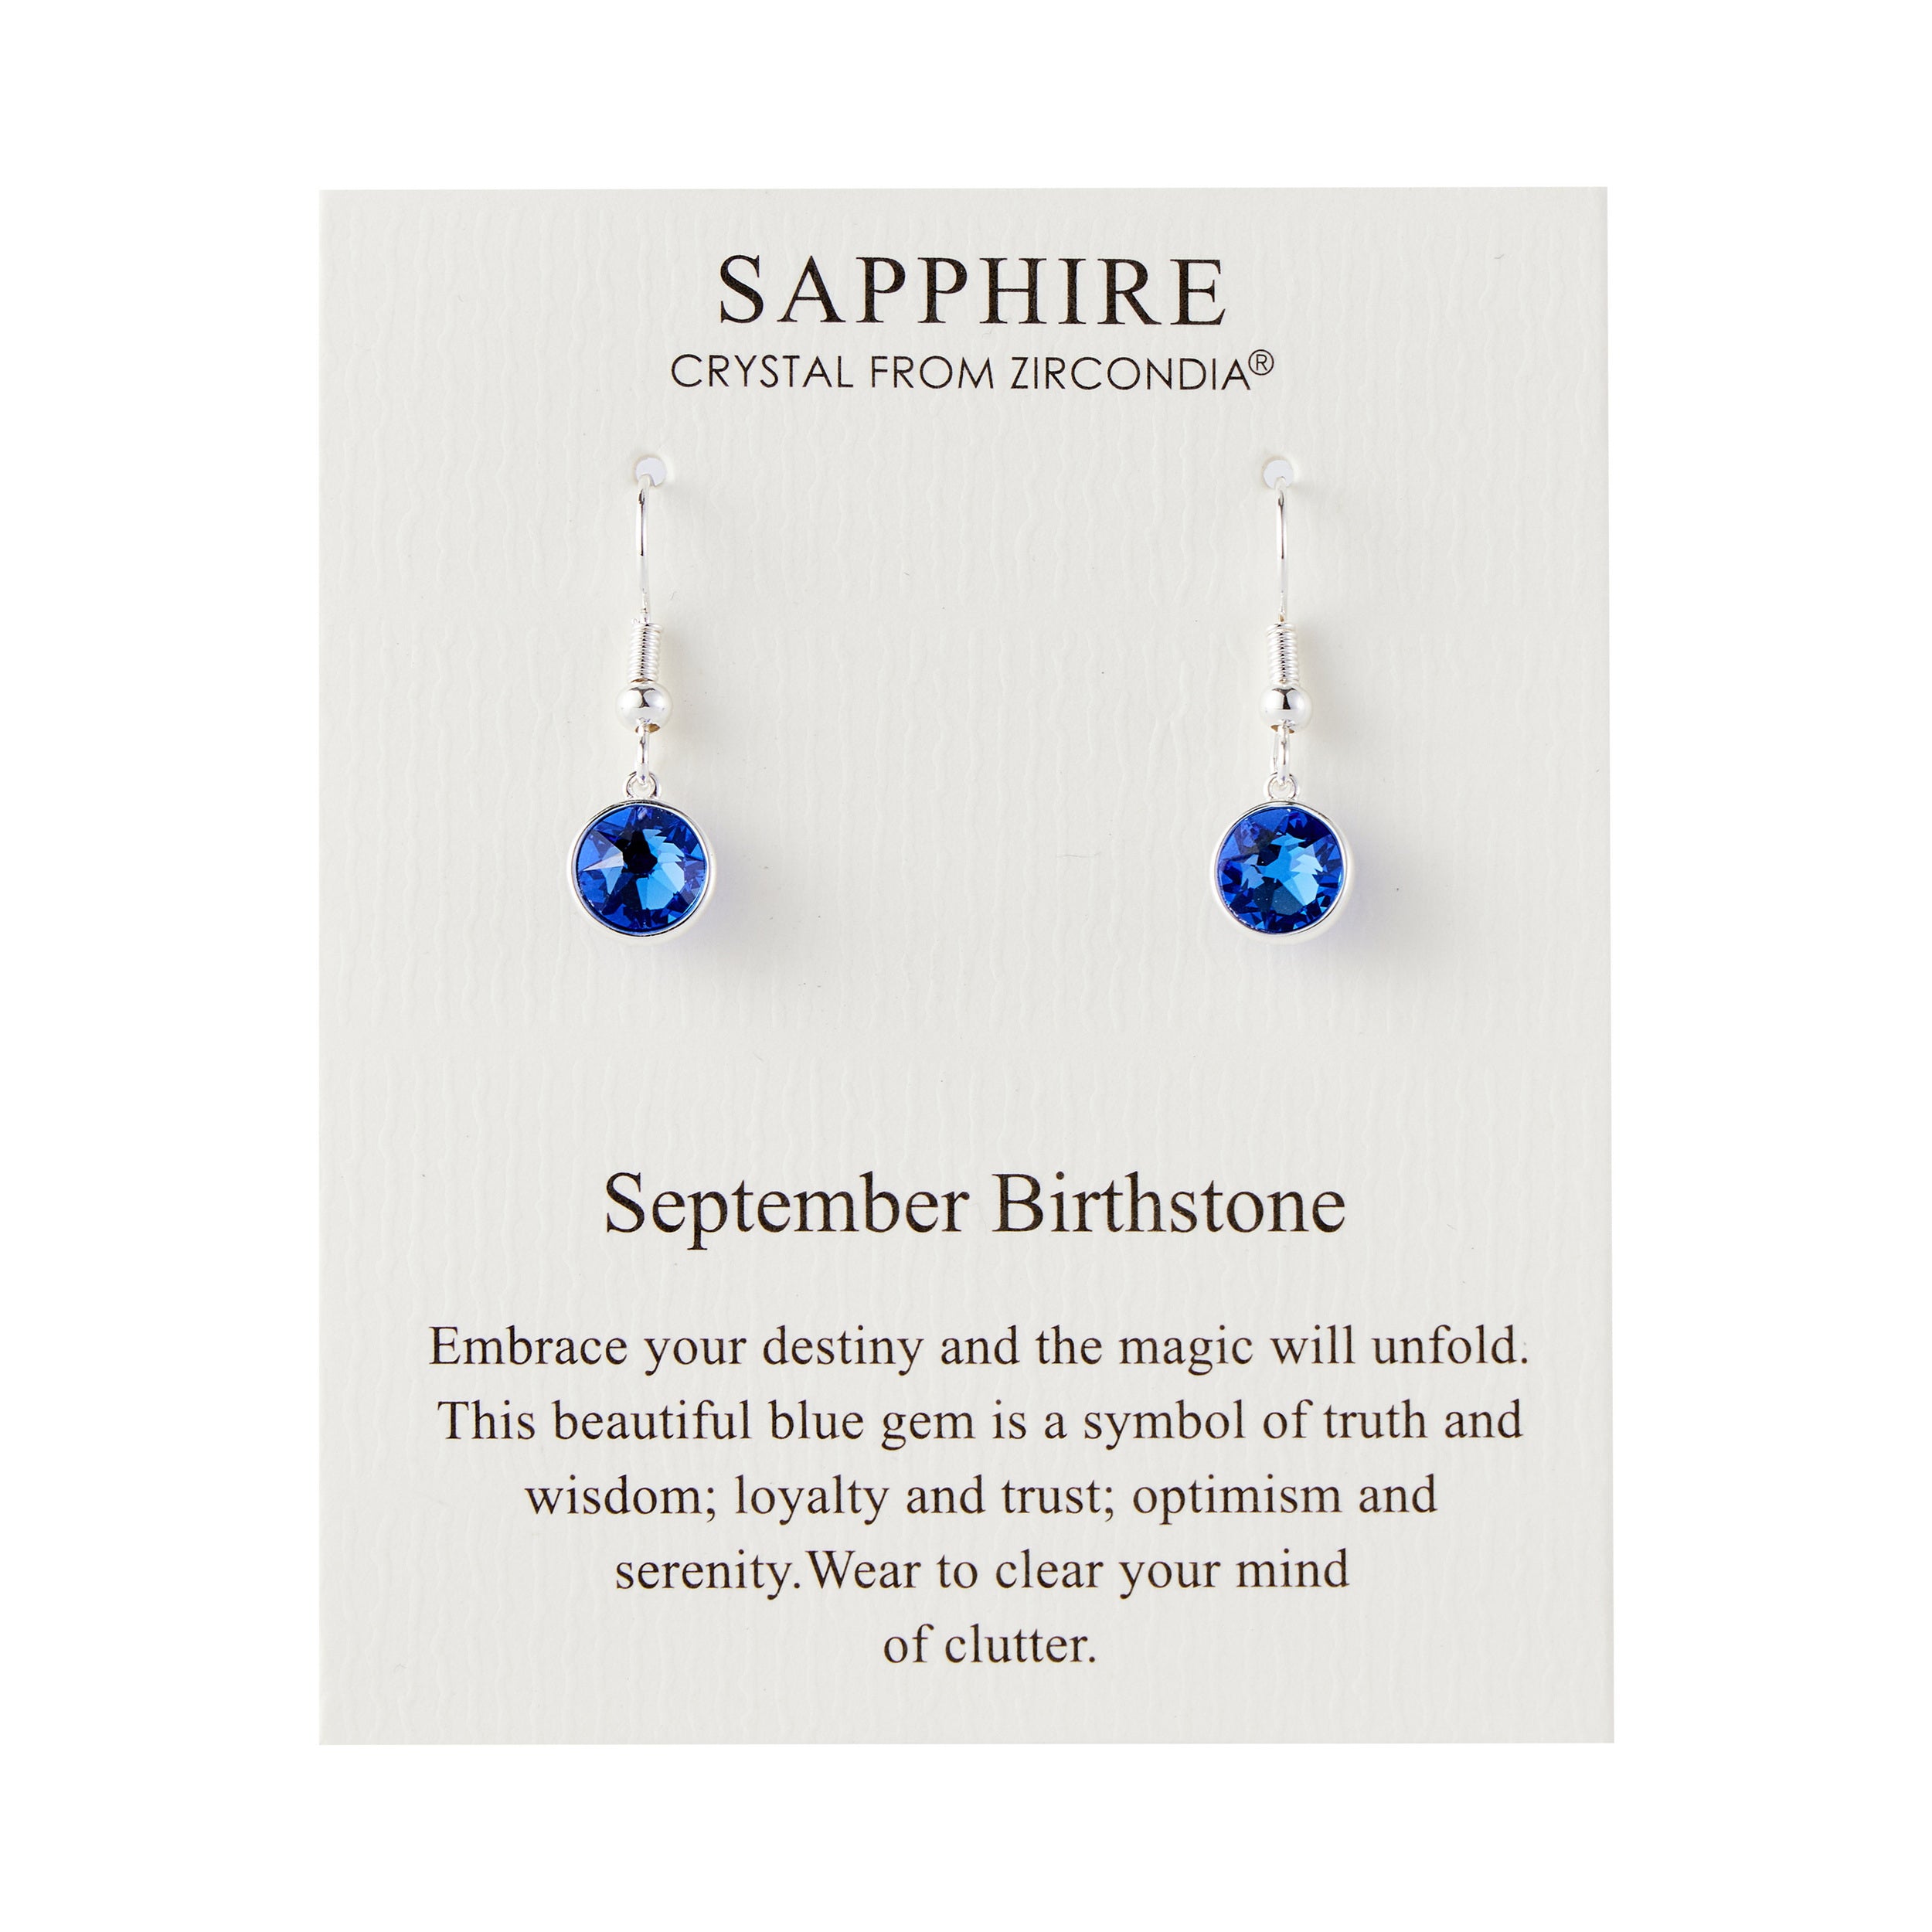 September Birthstone Drop Earrings Created with Sapphire Zircondia® Crystals